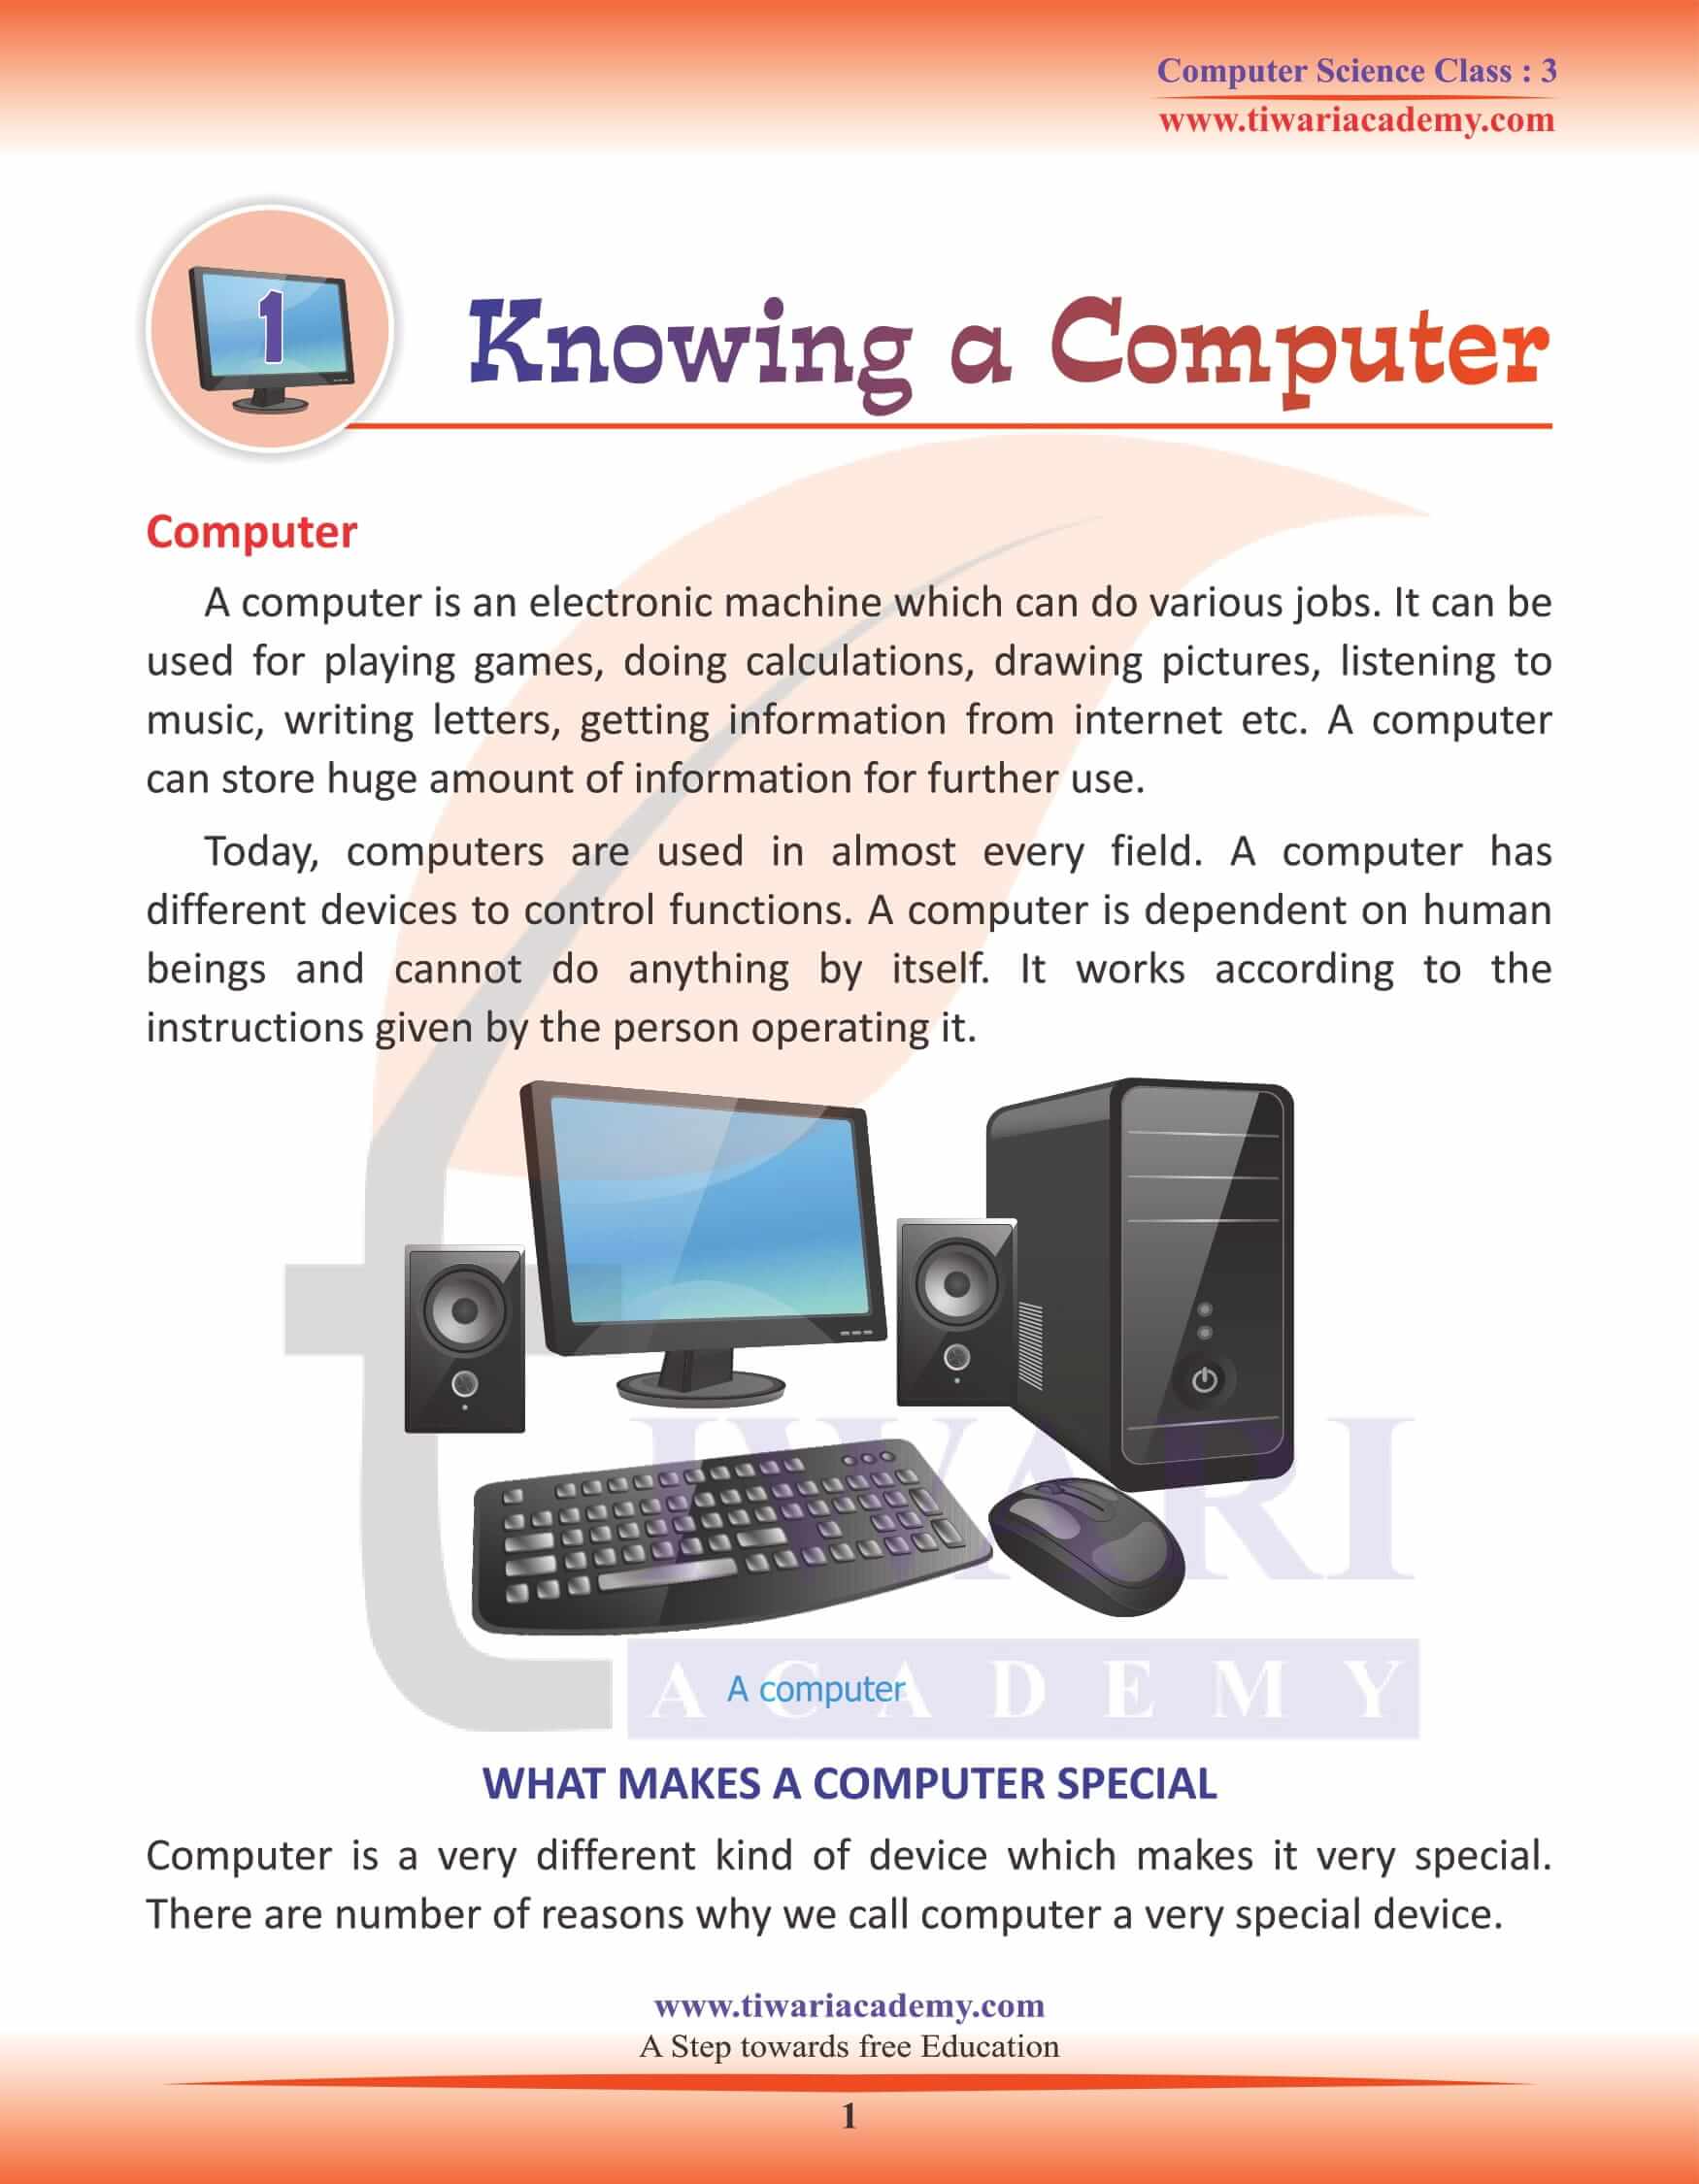 Knowing a Computer